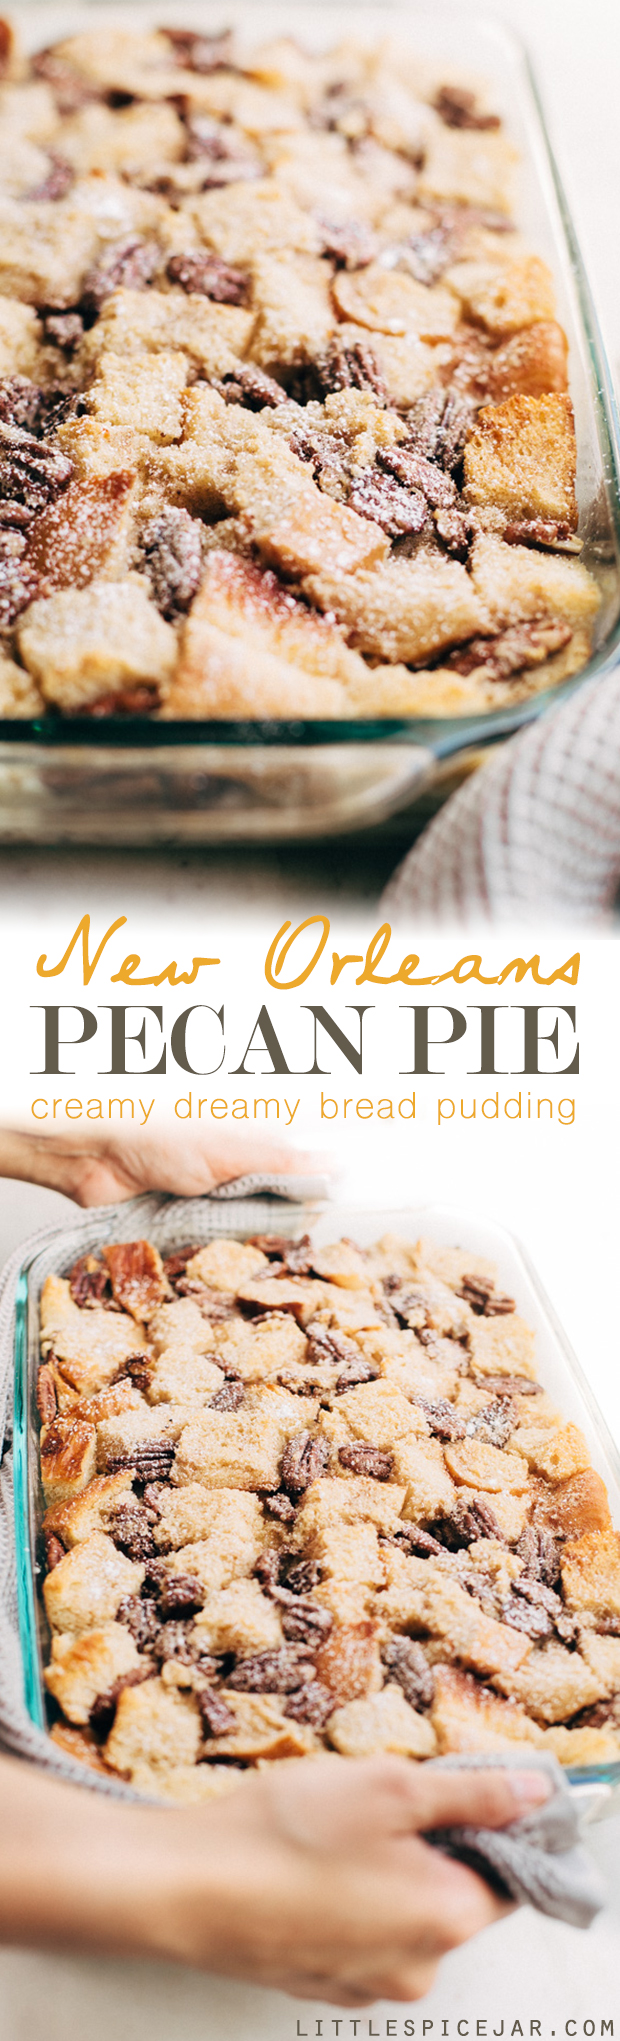 New Orleans Pecan Pie Bread Pudding - use up that leftover stale bread in this make-ahead dessert! The perfect holiday treat! #dessert #breadpudding #pecanpie | Littlespicejar.com